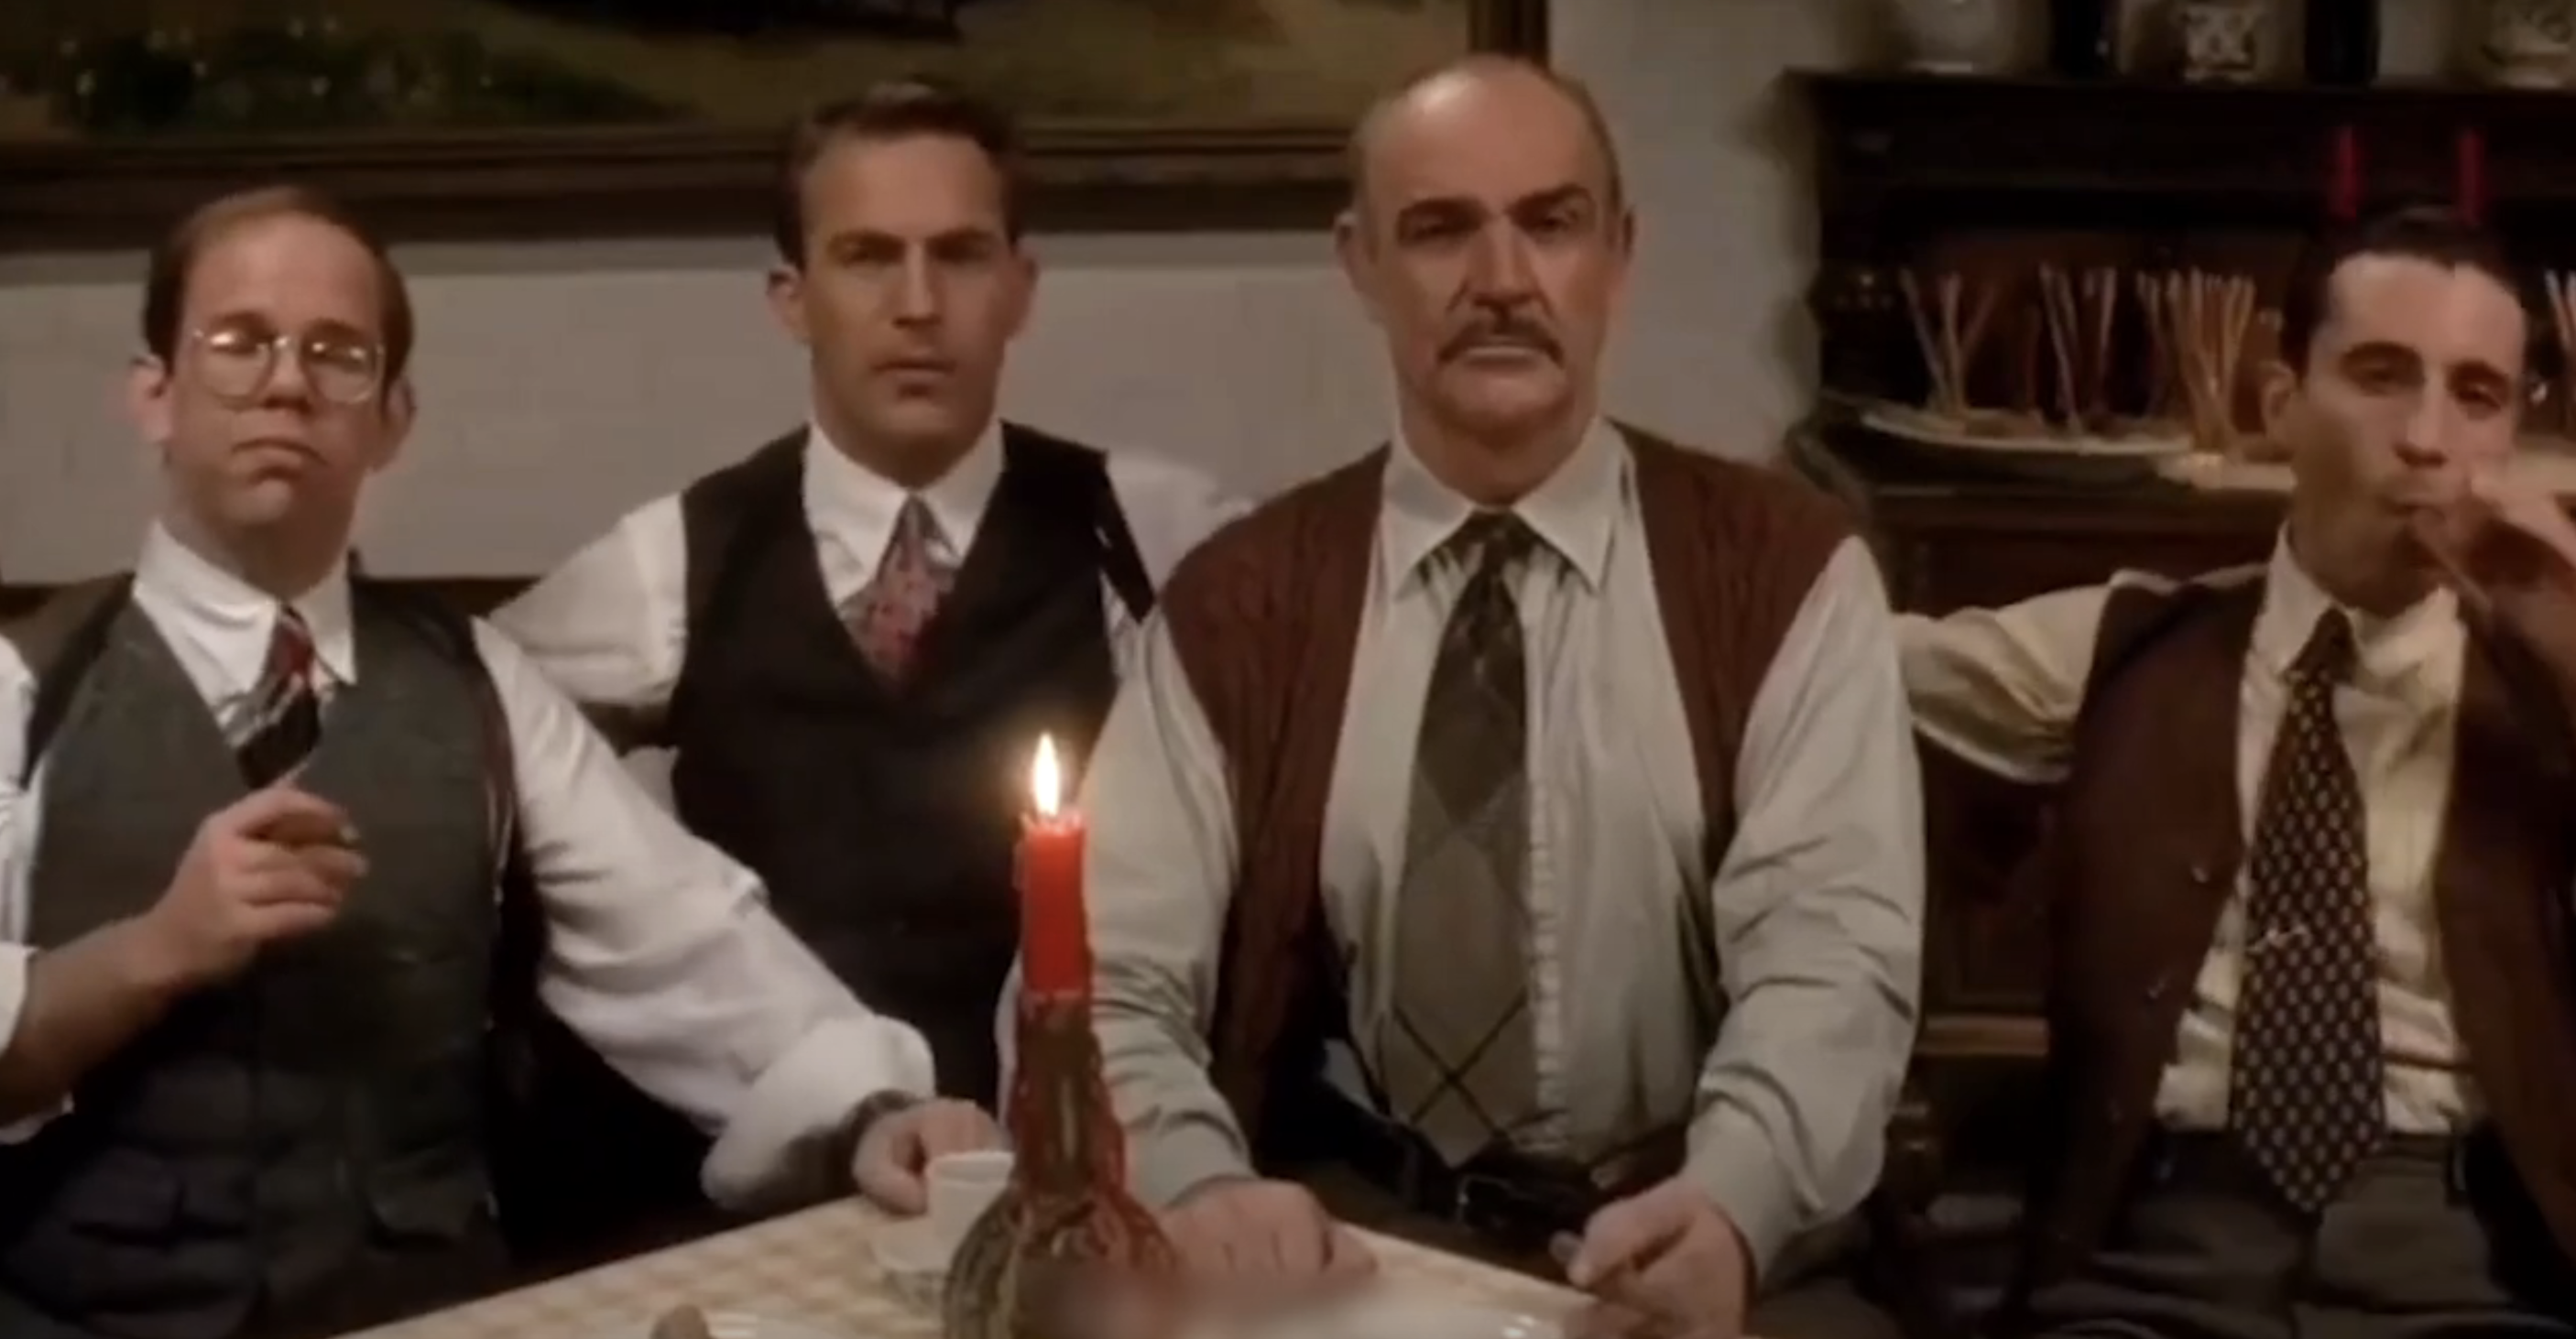 People in 1920s attire, sitting at a table with a burning candle. From left to right: a man with glasses, Kevin Costner, Sean Connery, and another man smoking a cigar